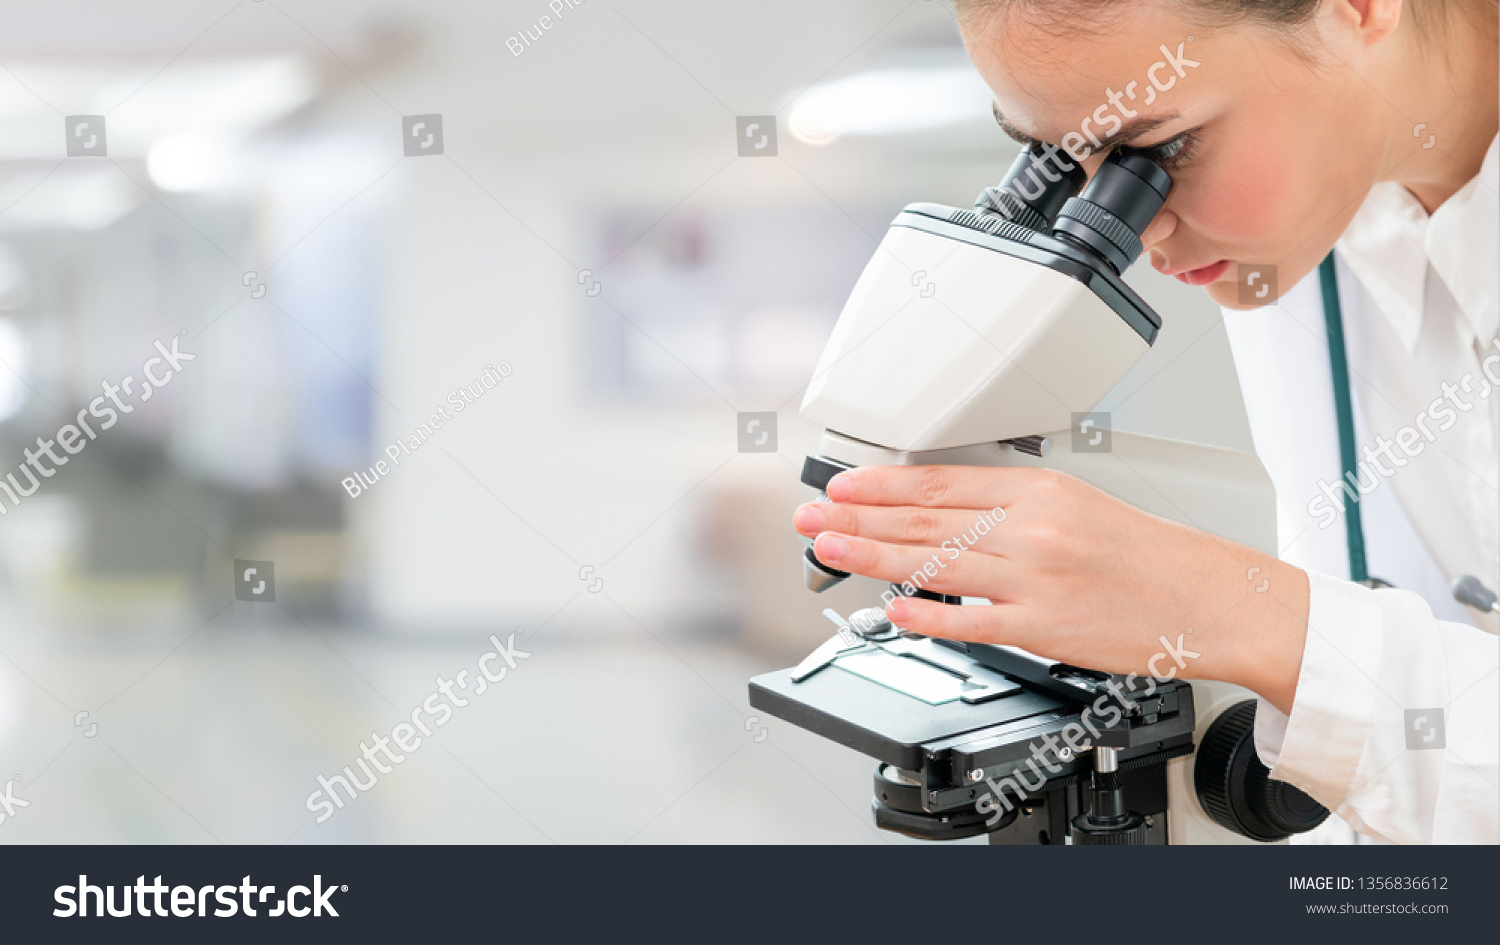 Scientist researcher using microscope in laboratory. Medical healthcare technology and pharmaceutical research and development concept. #1356836612